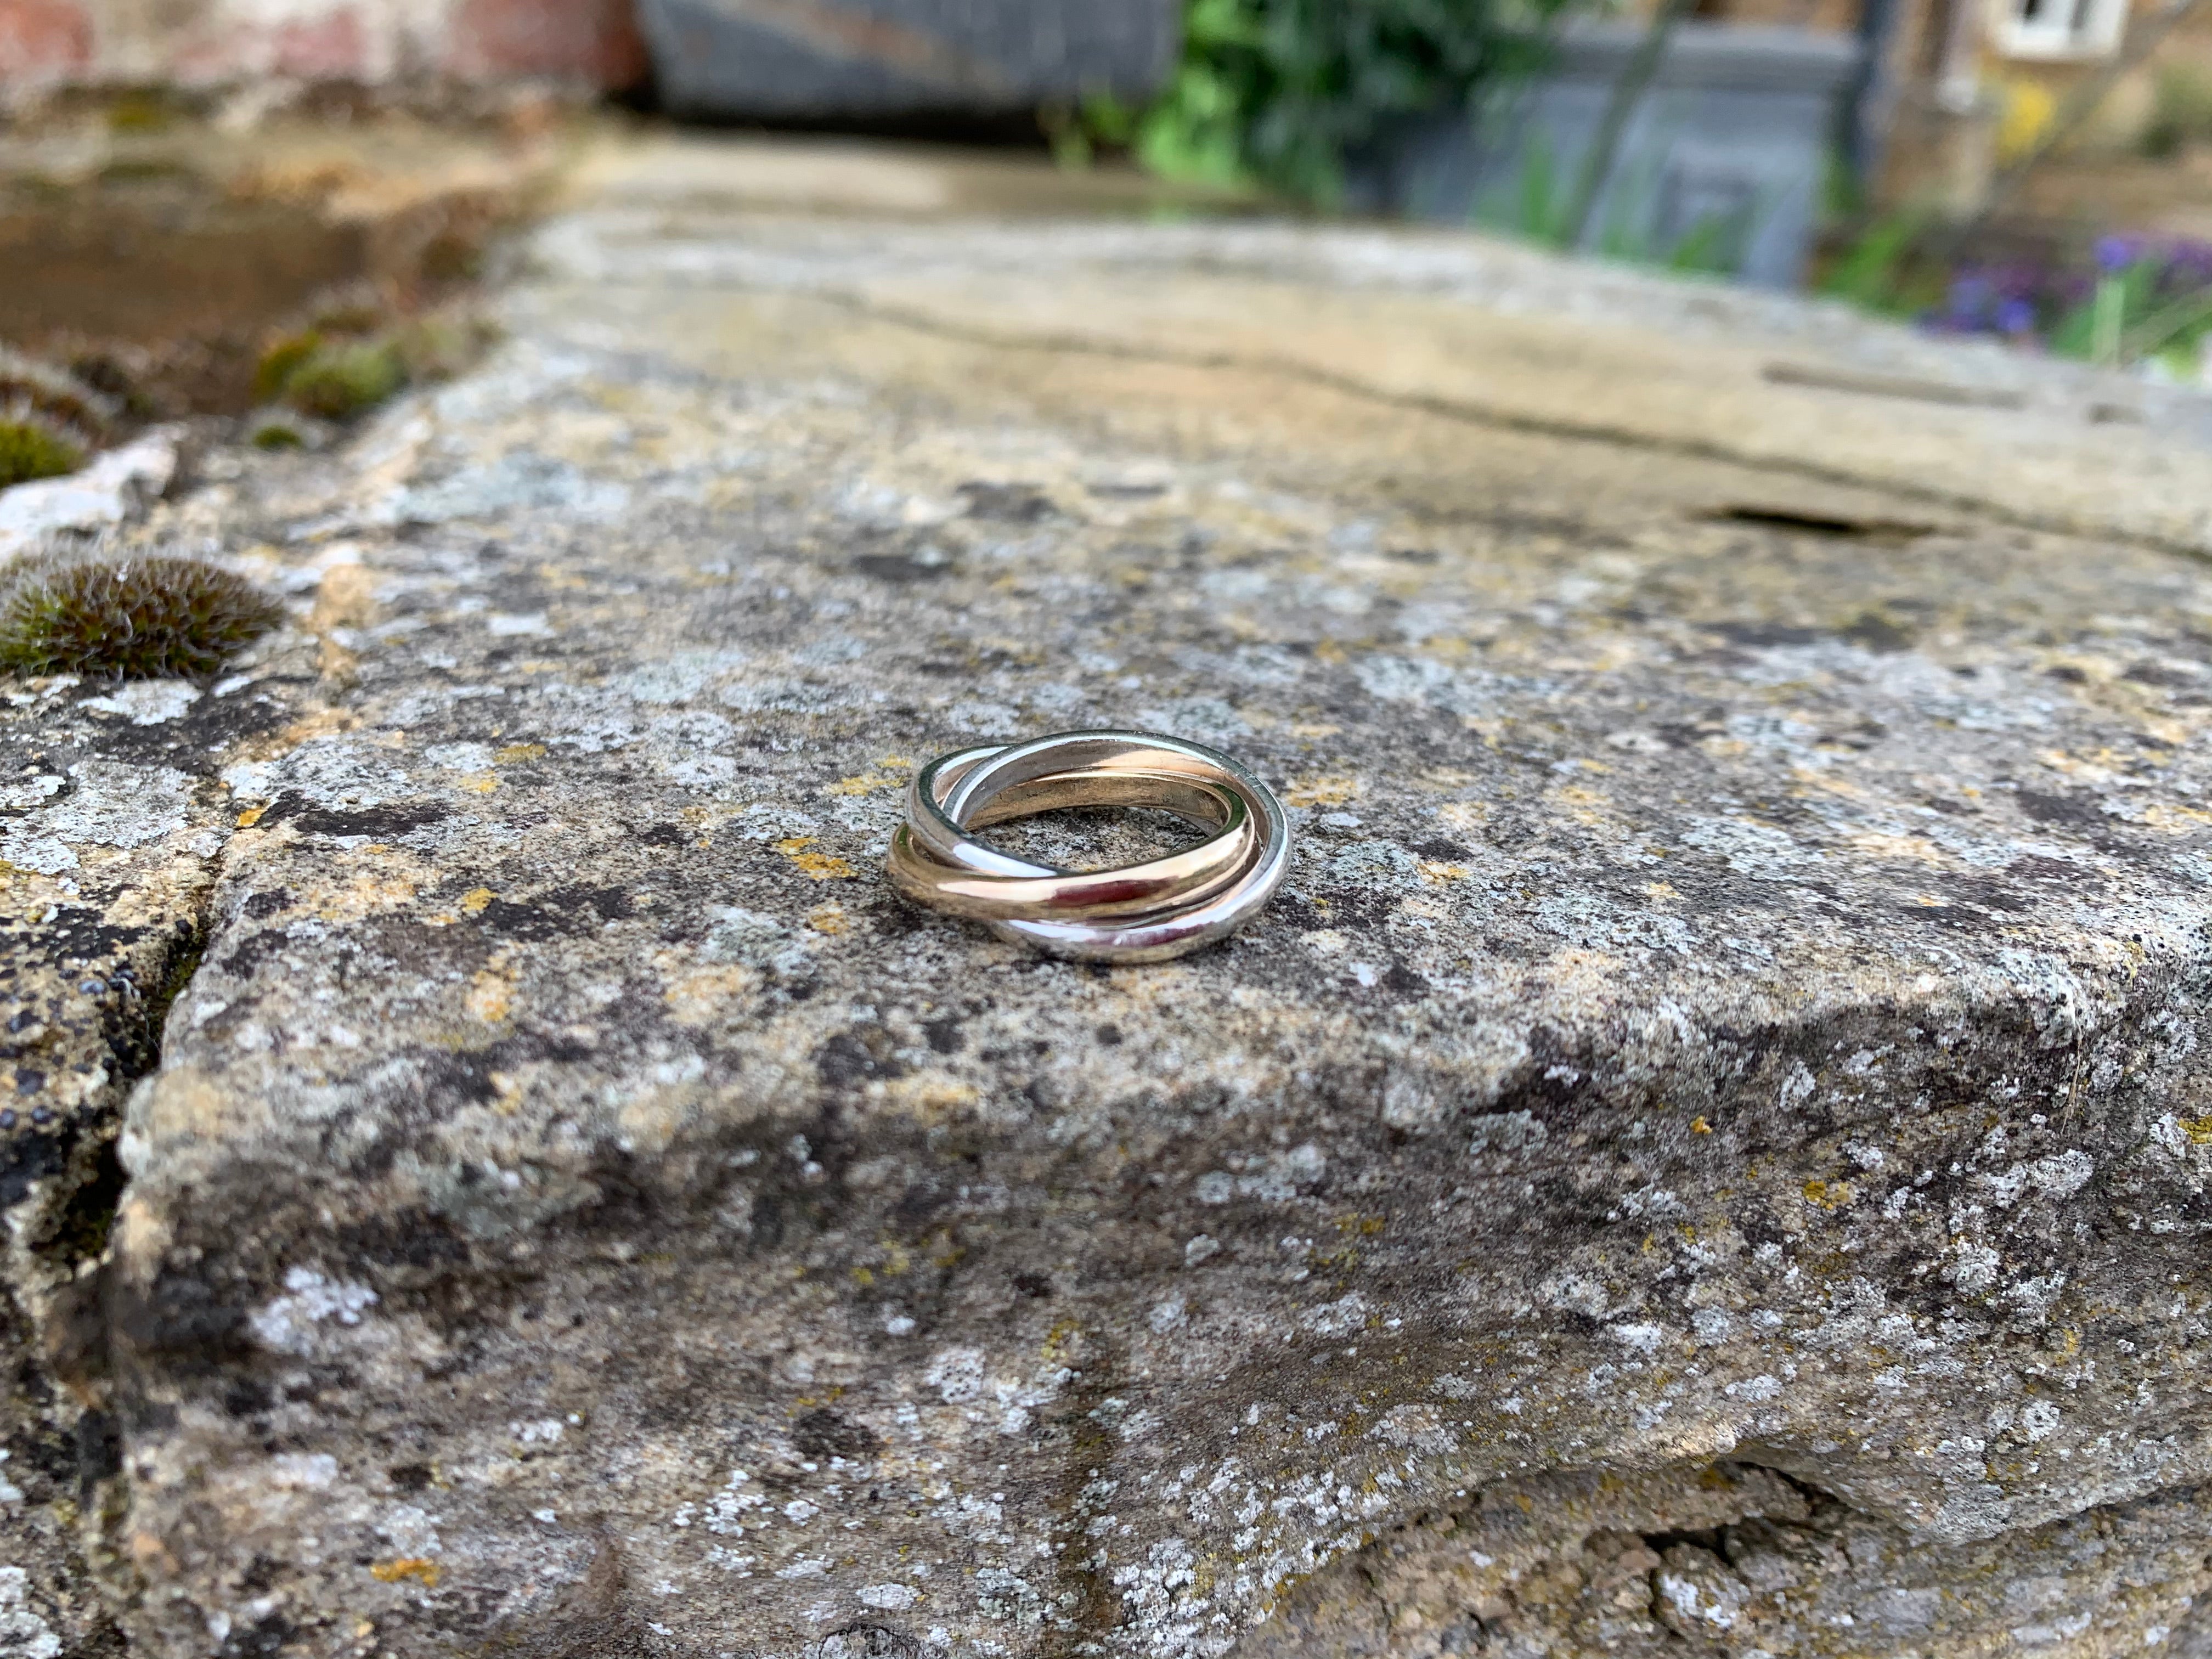 Rings with wood and silver - Wedding rings for groom and bride